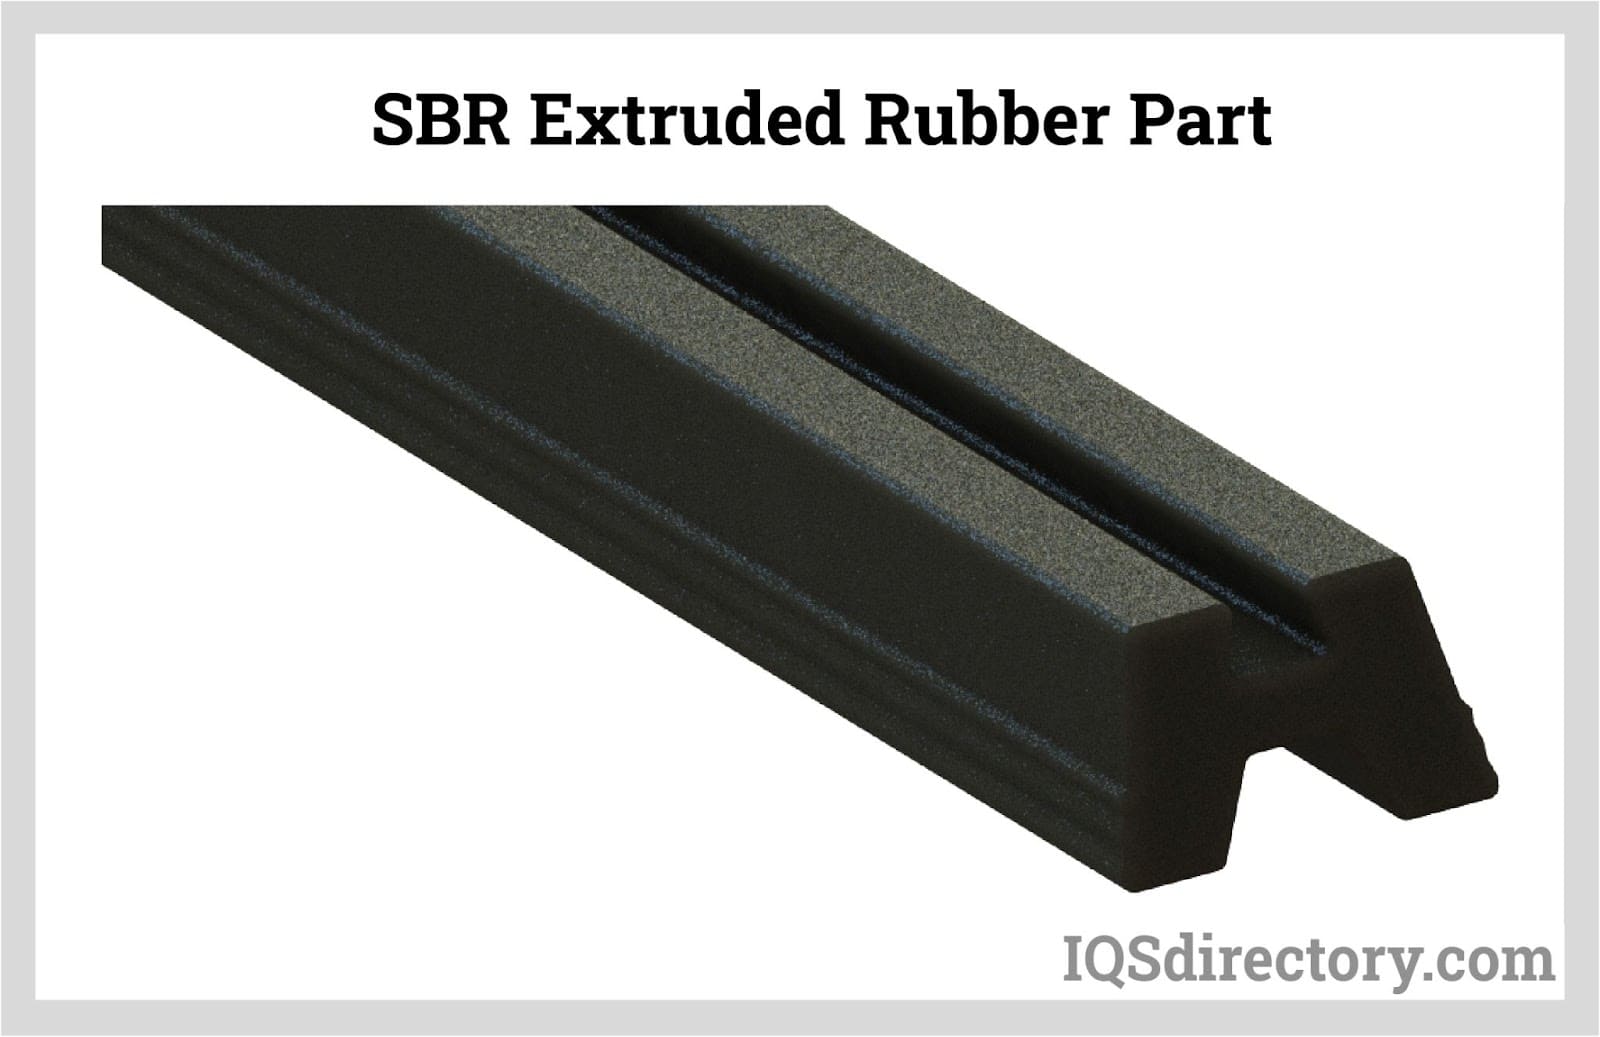 SBR Extruded Rubber Part